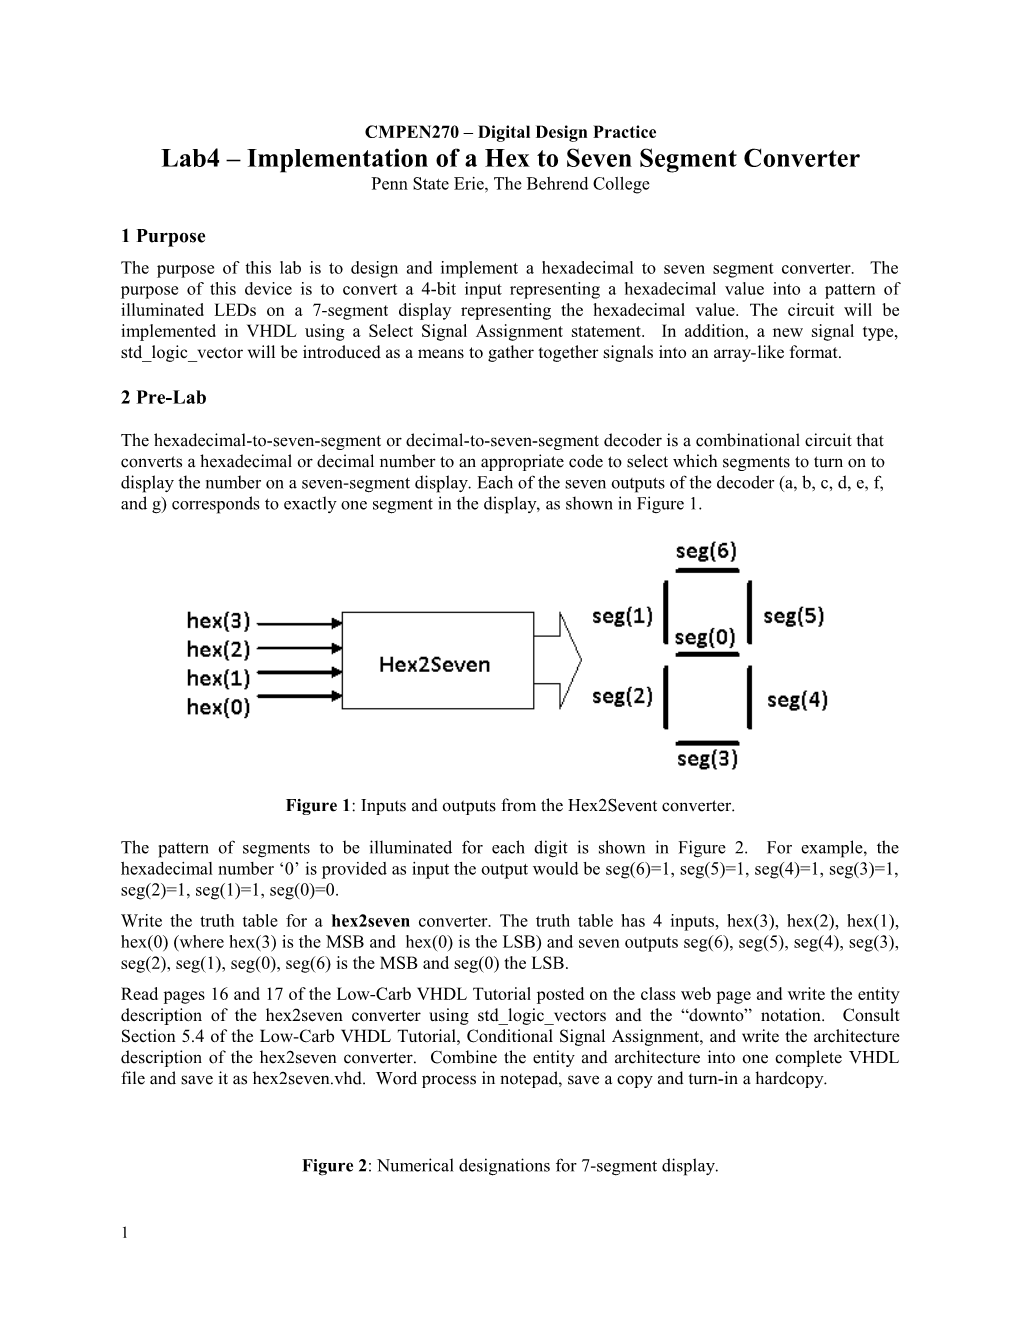 Lab4 Implementation of a Hex to Seven Segment Converter